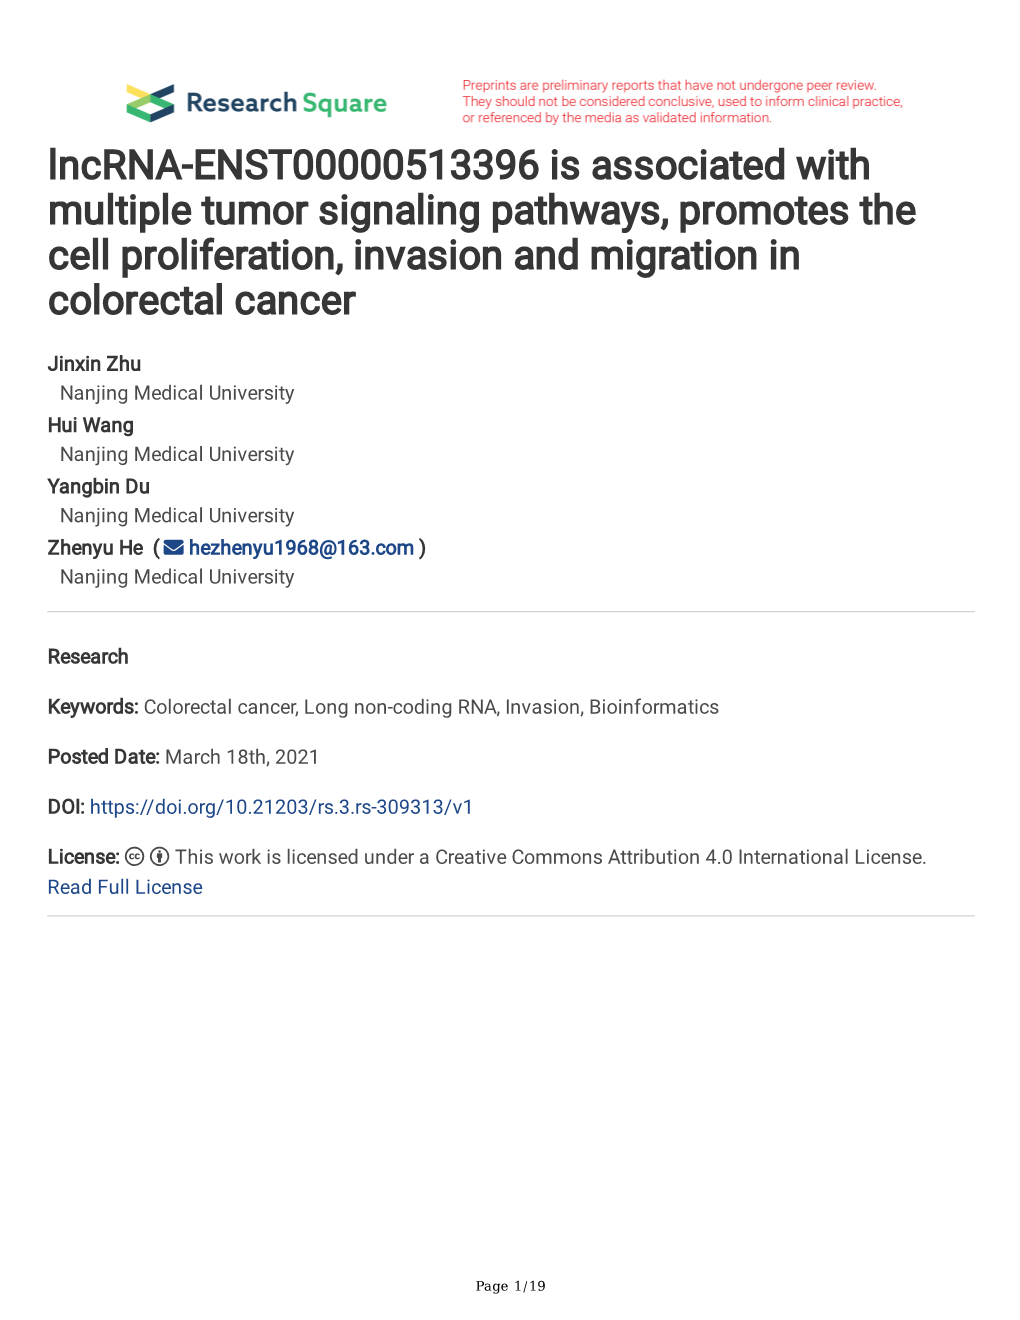 Lncrna-ENST00000513396 Is Associated with Multiple Tumor Signaling Pathways, Promotes the Cell Proliferation, Invasion and Migration in Colorectal Cancer